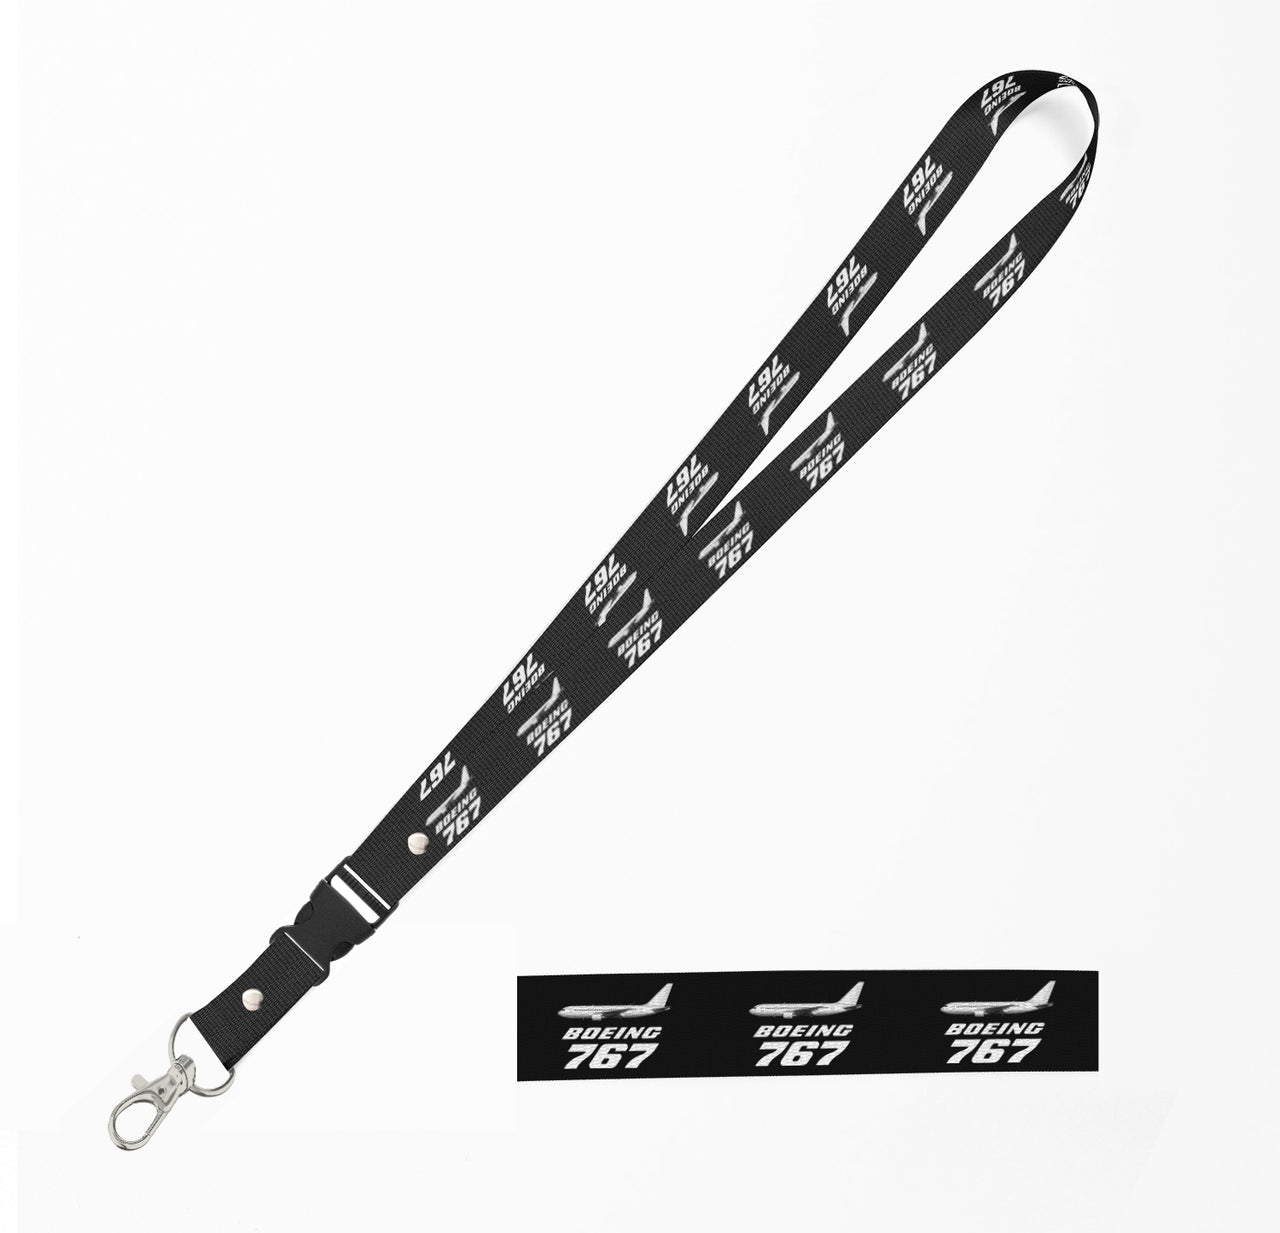 The Boeing 767 Designed Detachable Lanyard & ID Holders